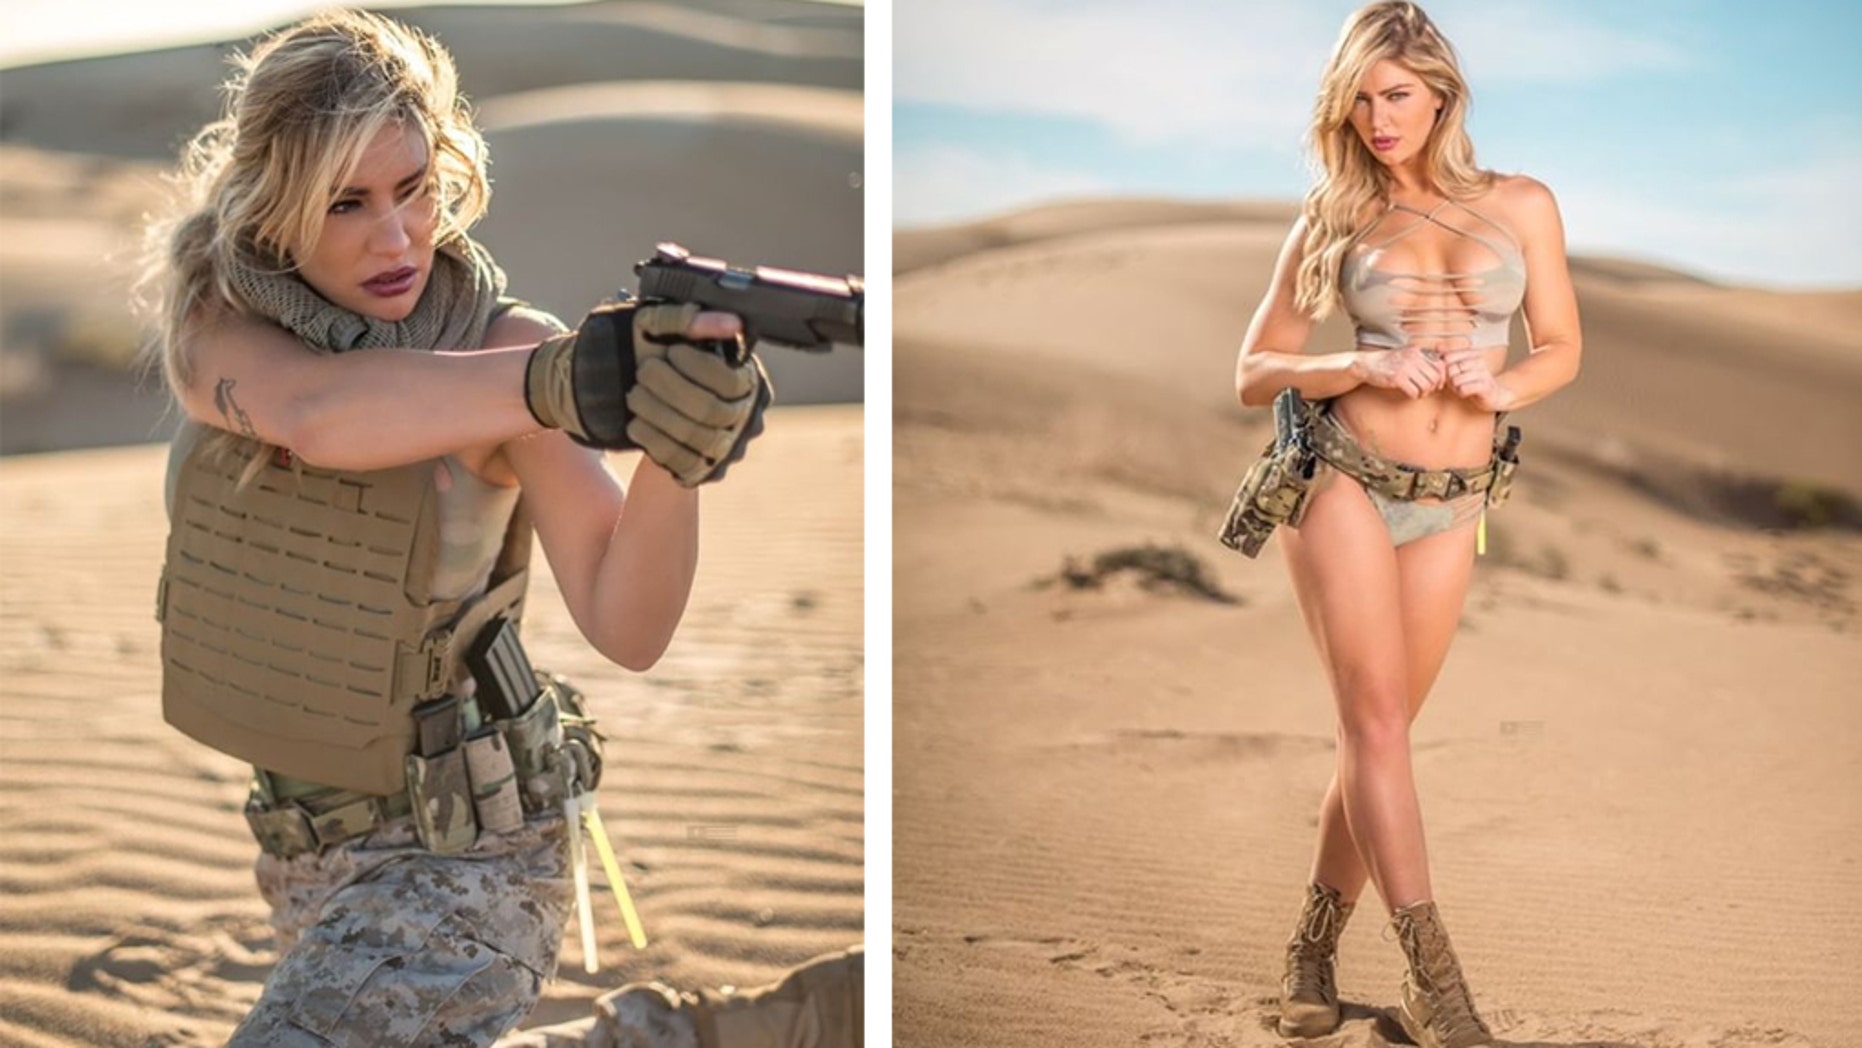 In a new desert photo shoot, the former Marine-turned-model is pictured wea...